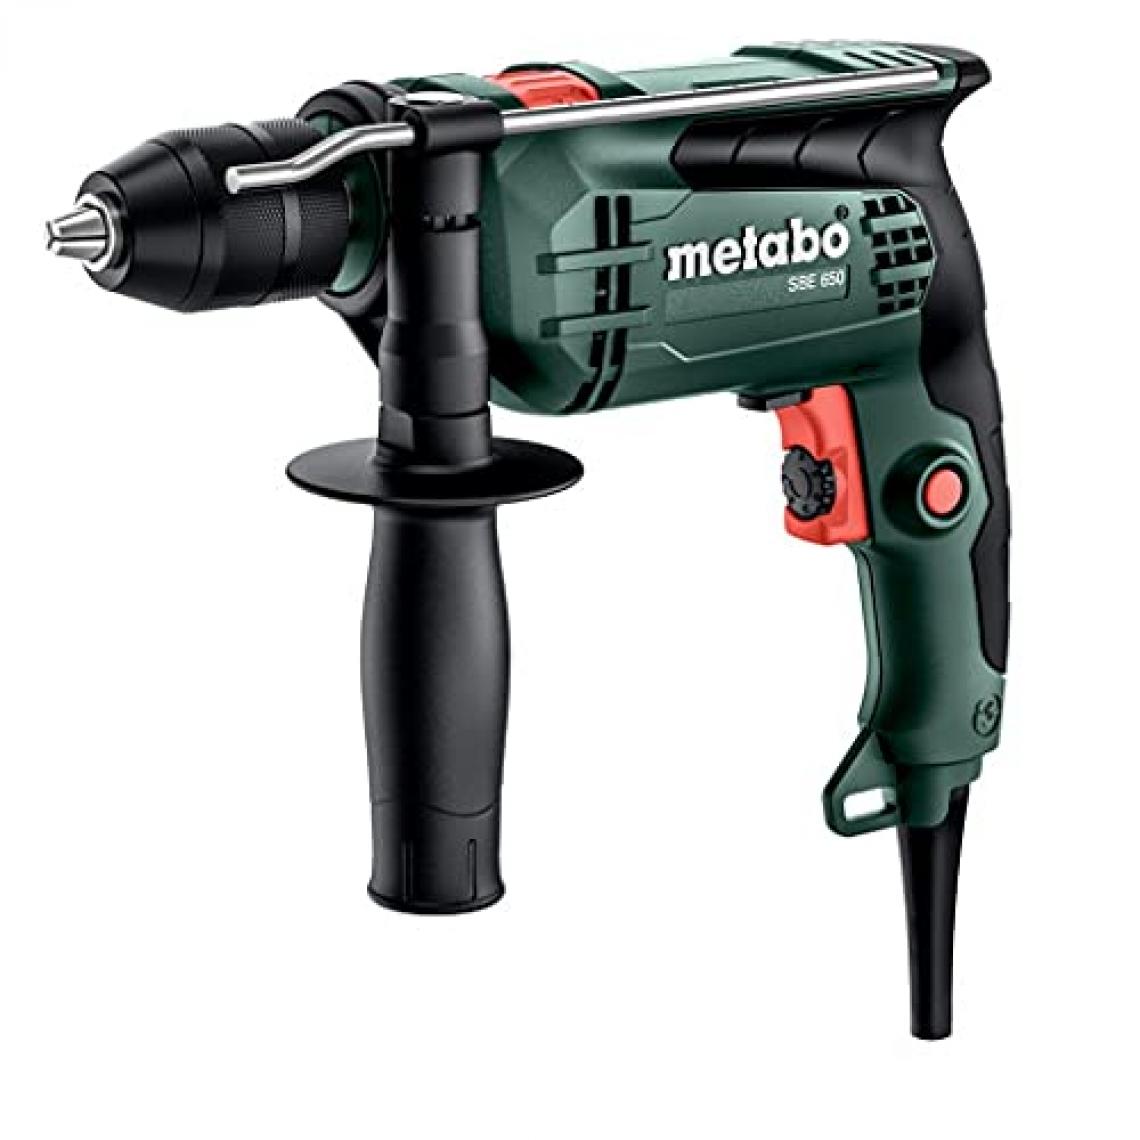 Metabo - Perceuse à percussion SBE 650W - Perceuses, visseuses filaires